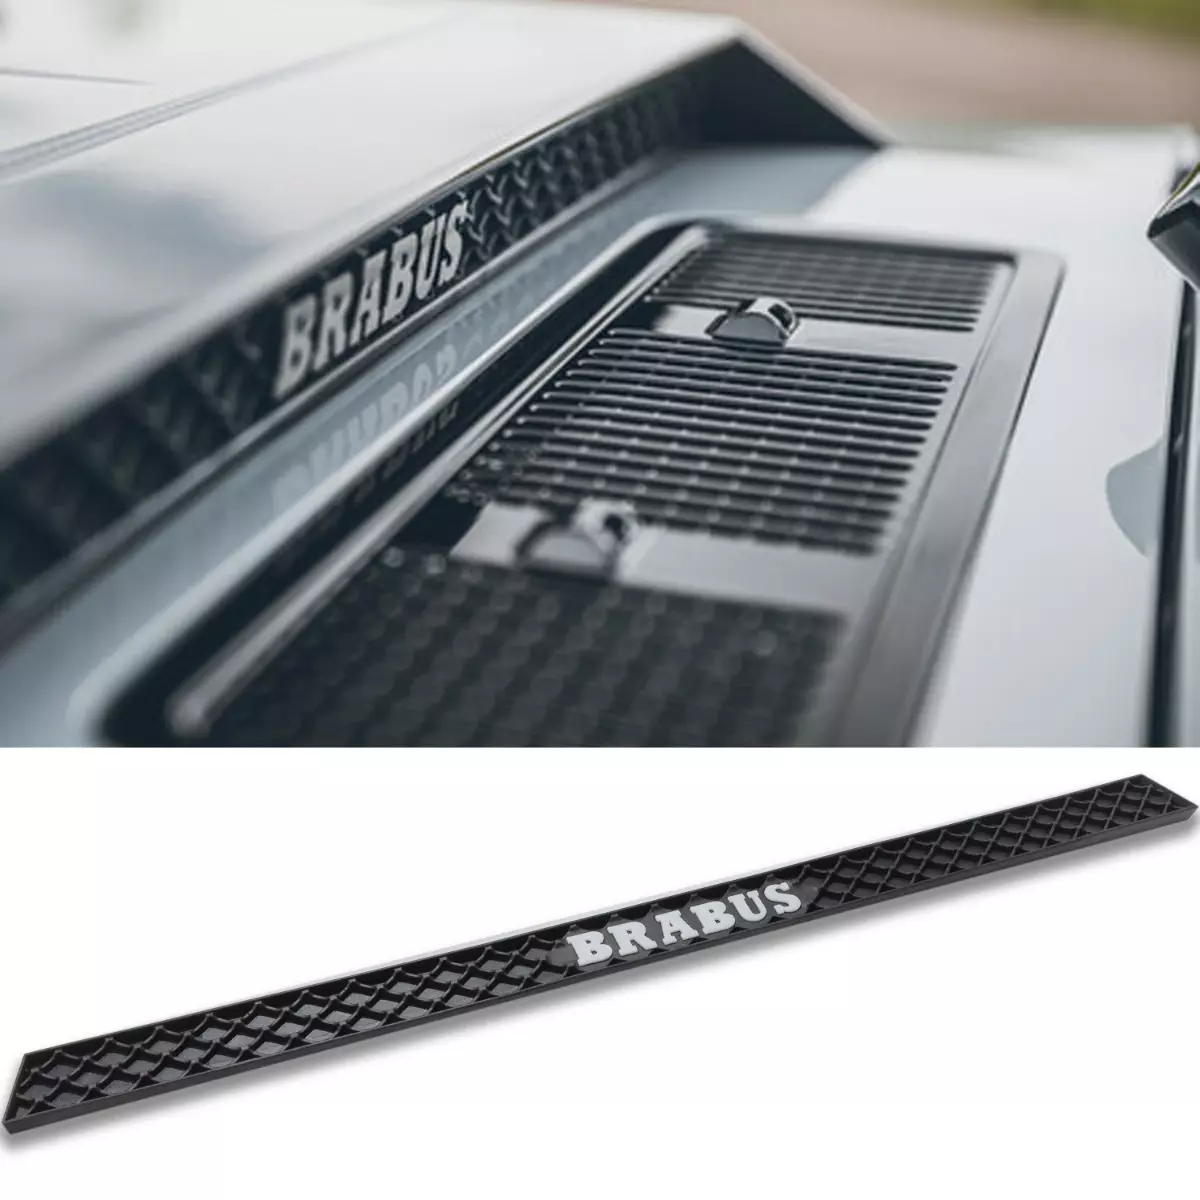 Plastic Brabus Hood Scoop Tail Mesh for Mercedes Benz G class W464 W463a G63 G500 G350